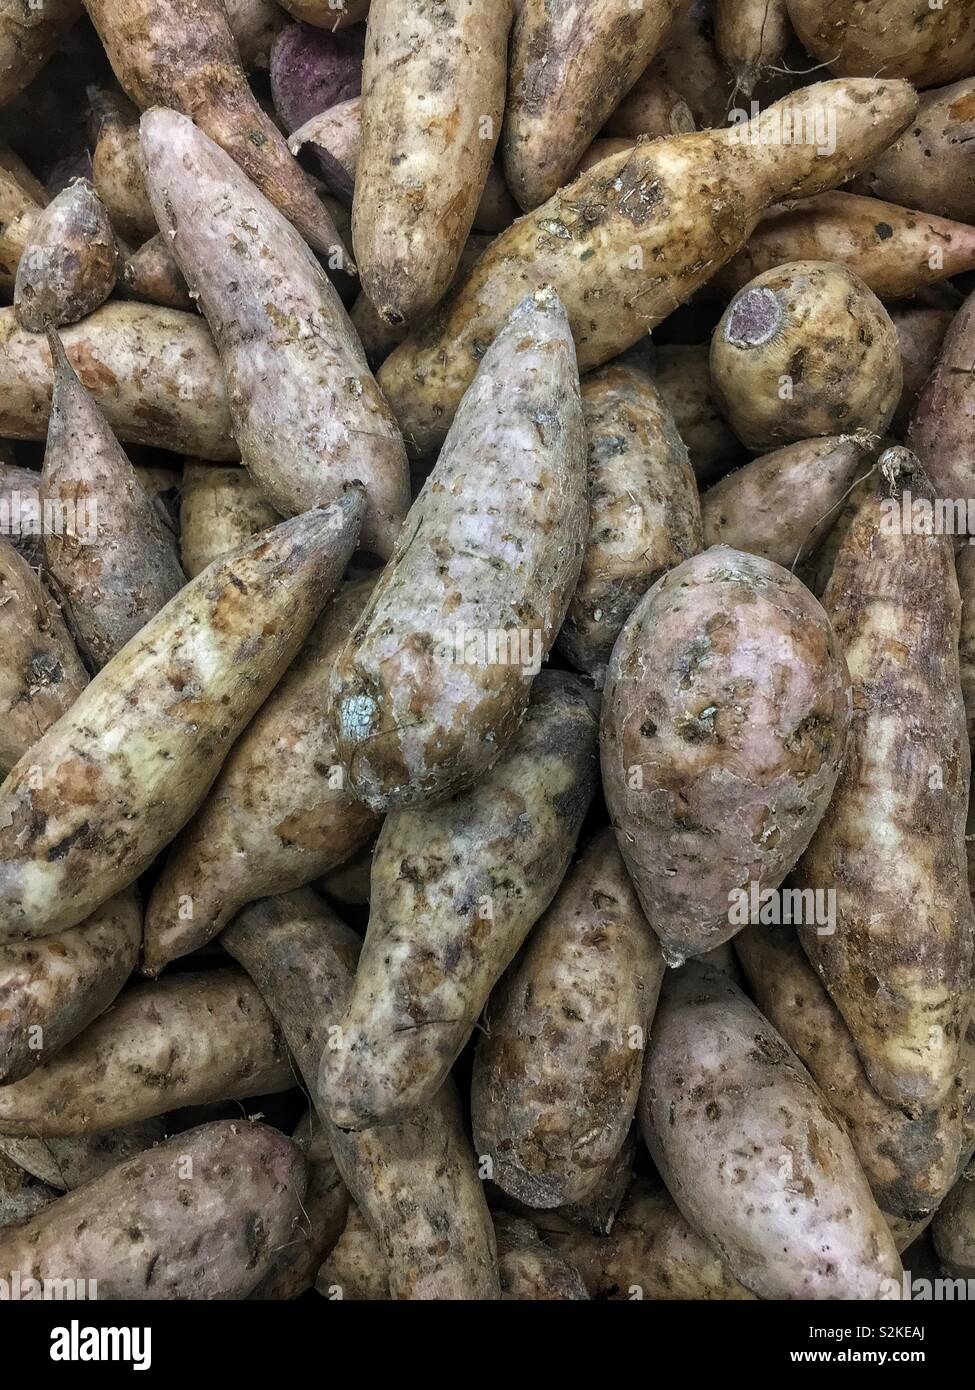 Full frame of fresh delicious ripe Dioscorea alata, purple yams, ube, or greater yams on display and for sale at the local produce market. Stock Photo